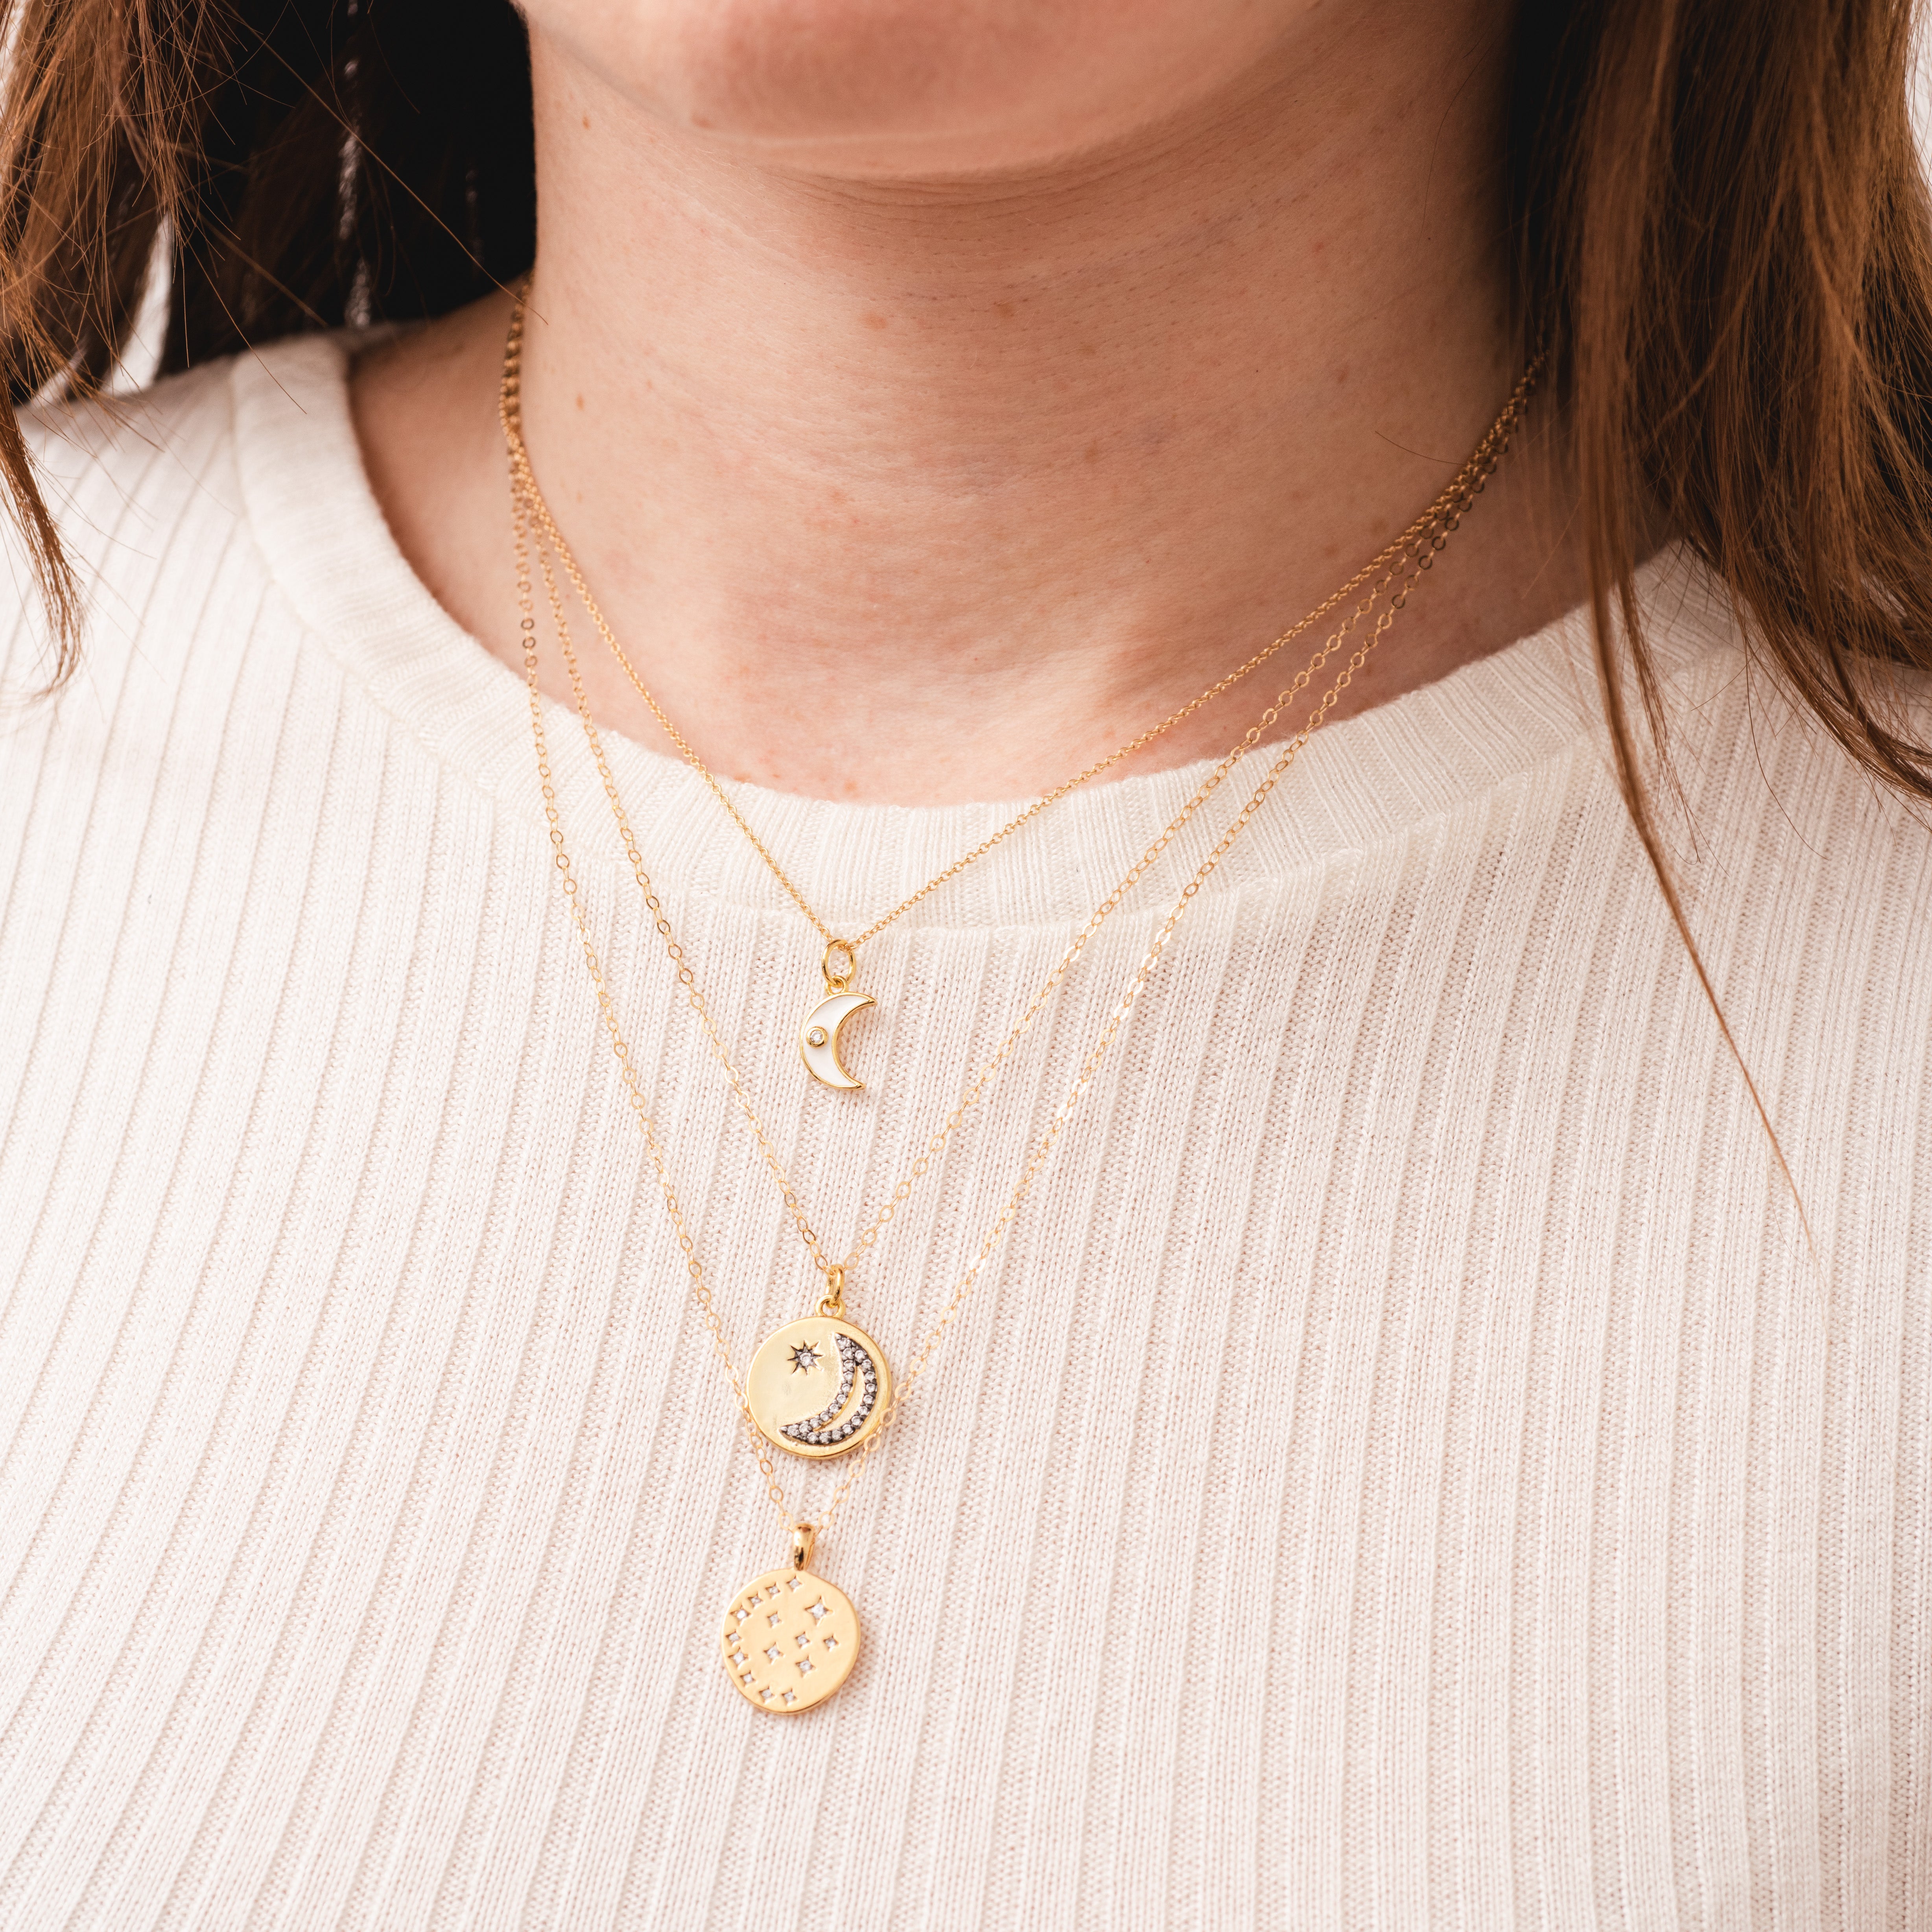 Womens 10K Gold Moon Pendant Necklace - JCPenney